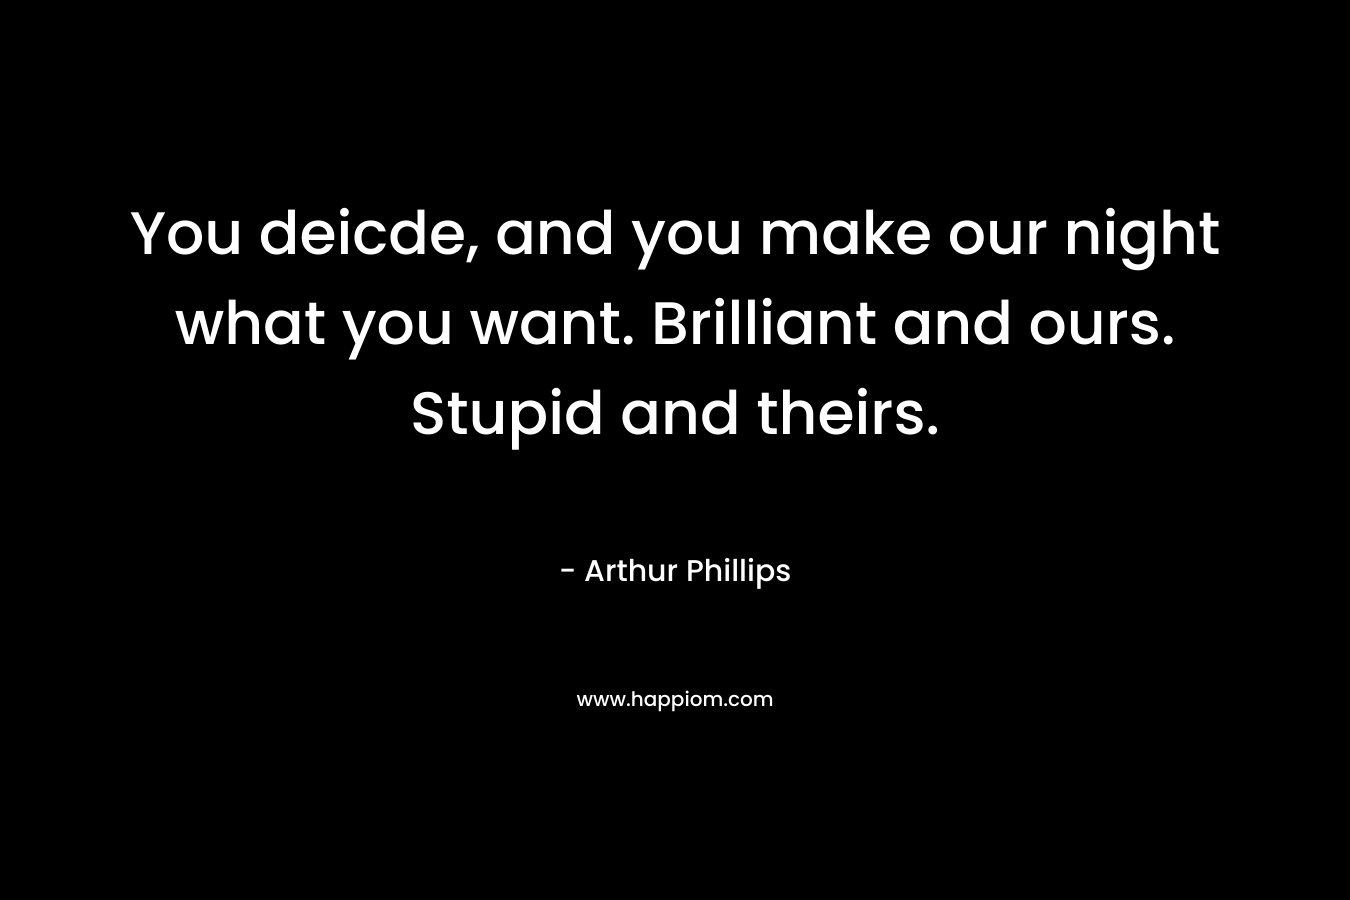 You deicde, and you make our night what you want. Brilliant and ours. Stupid and theirs. – Arthur Phillips